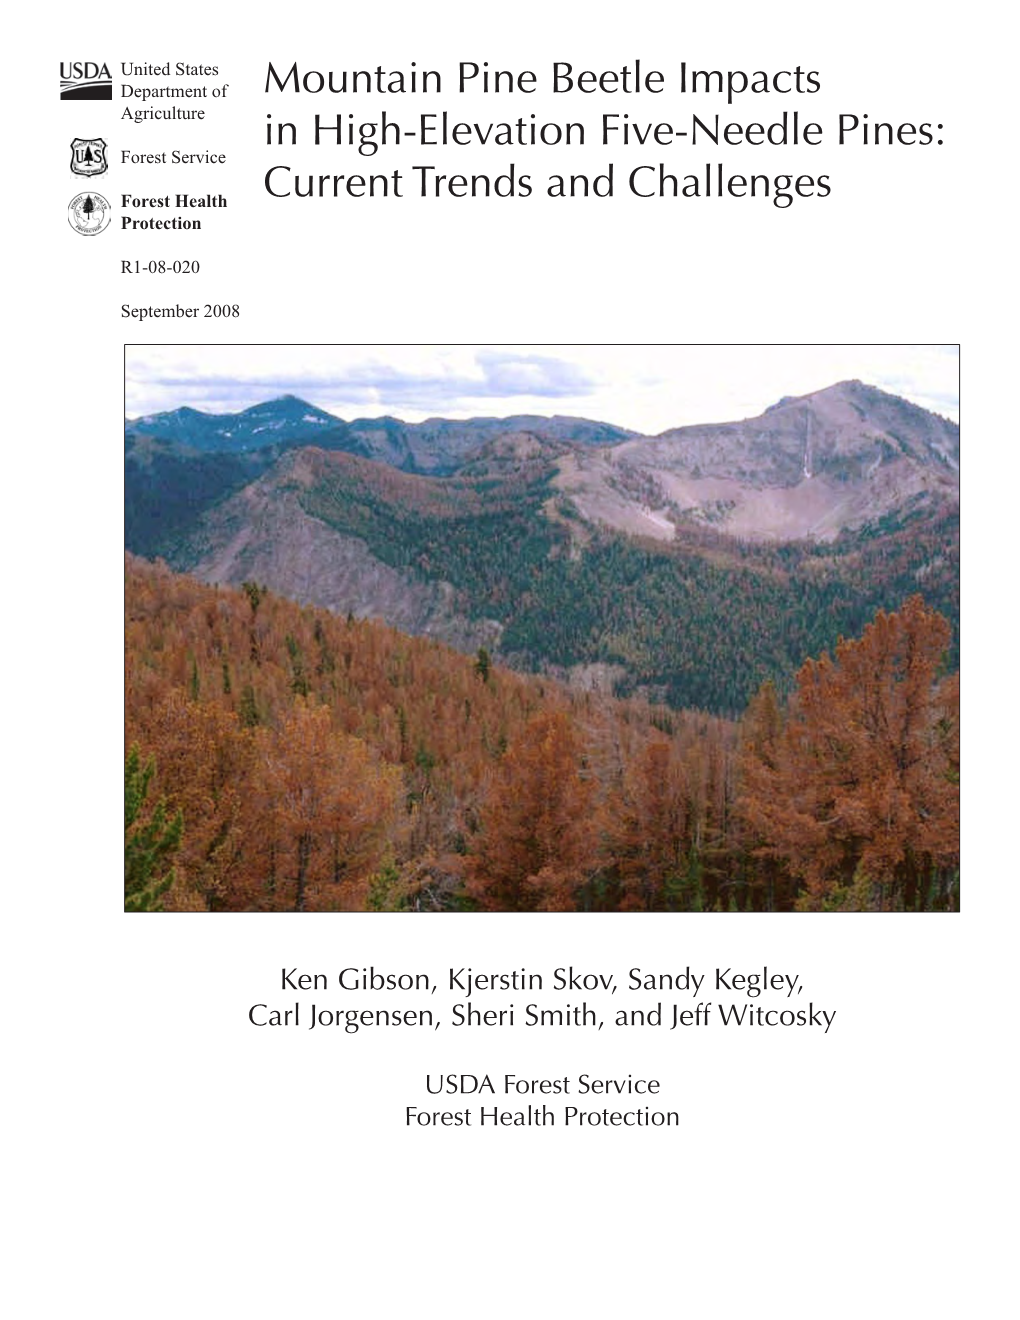 Mountain Pine Beetle Impacts in High-Elevation Five-Needle Pines: Current Trends and Challenges